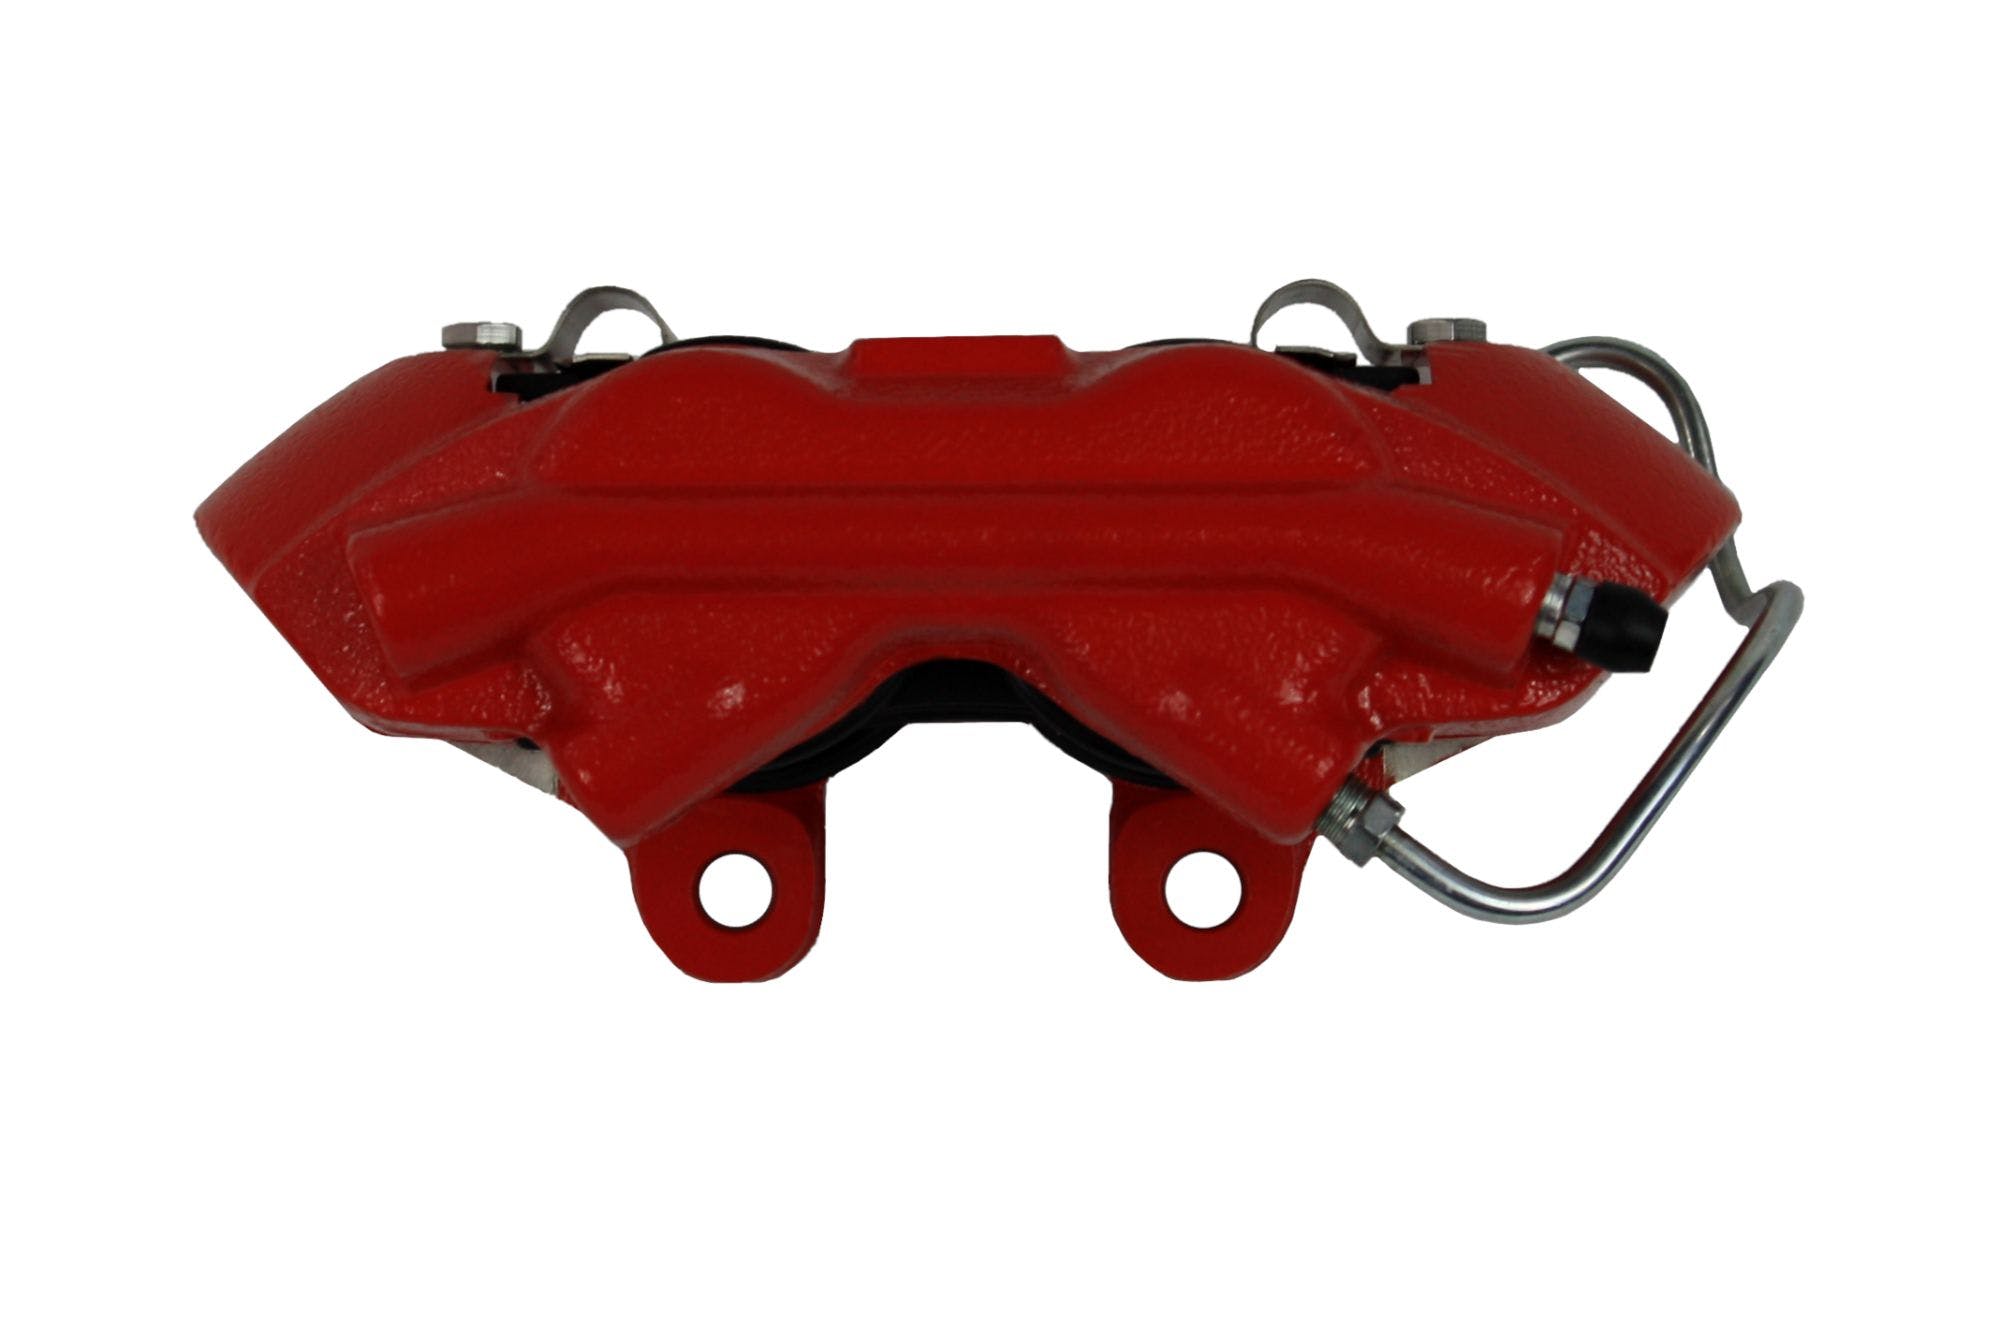 LEED Brakes RFC2002SMX Mopar B and E Body MaxGrip XDS Conversion Kit - Spindle Mount - Red Powder Coat